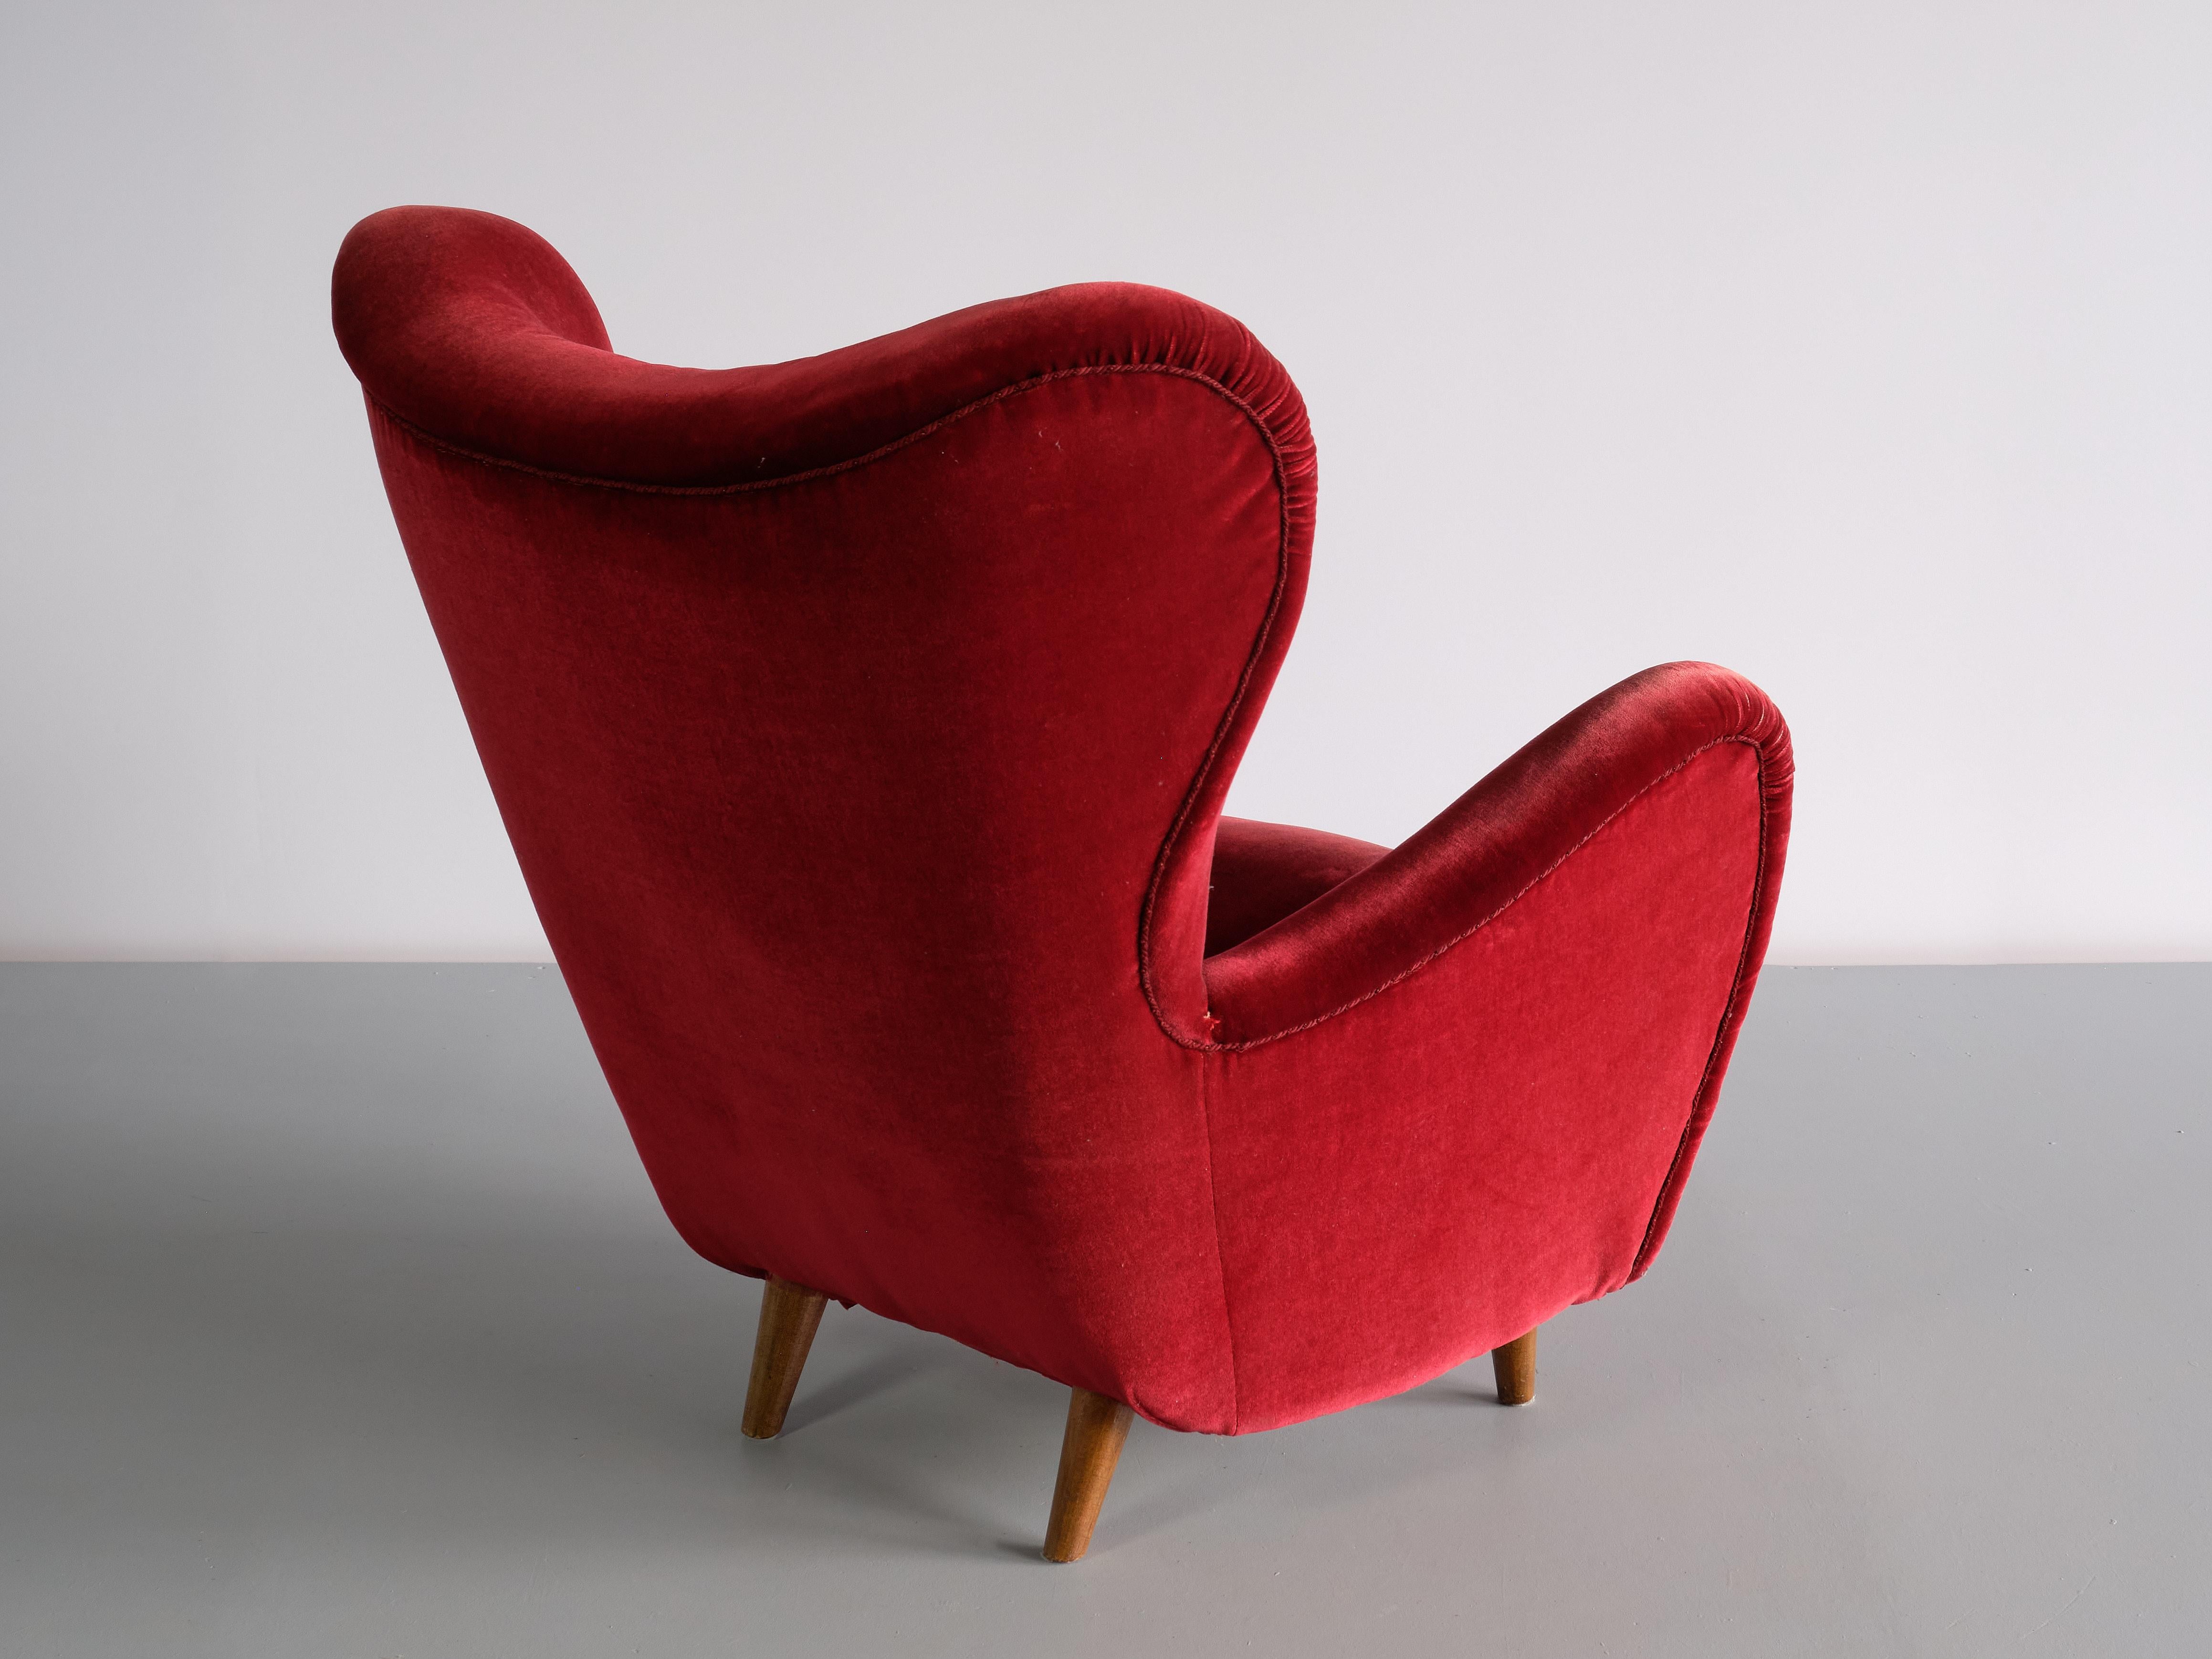 Fabric Otto Schulz Wingback Chair in Red Velvet and Beech, Boet, Sweden, 1946